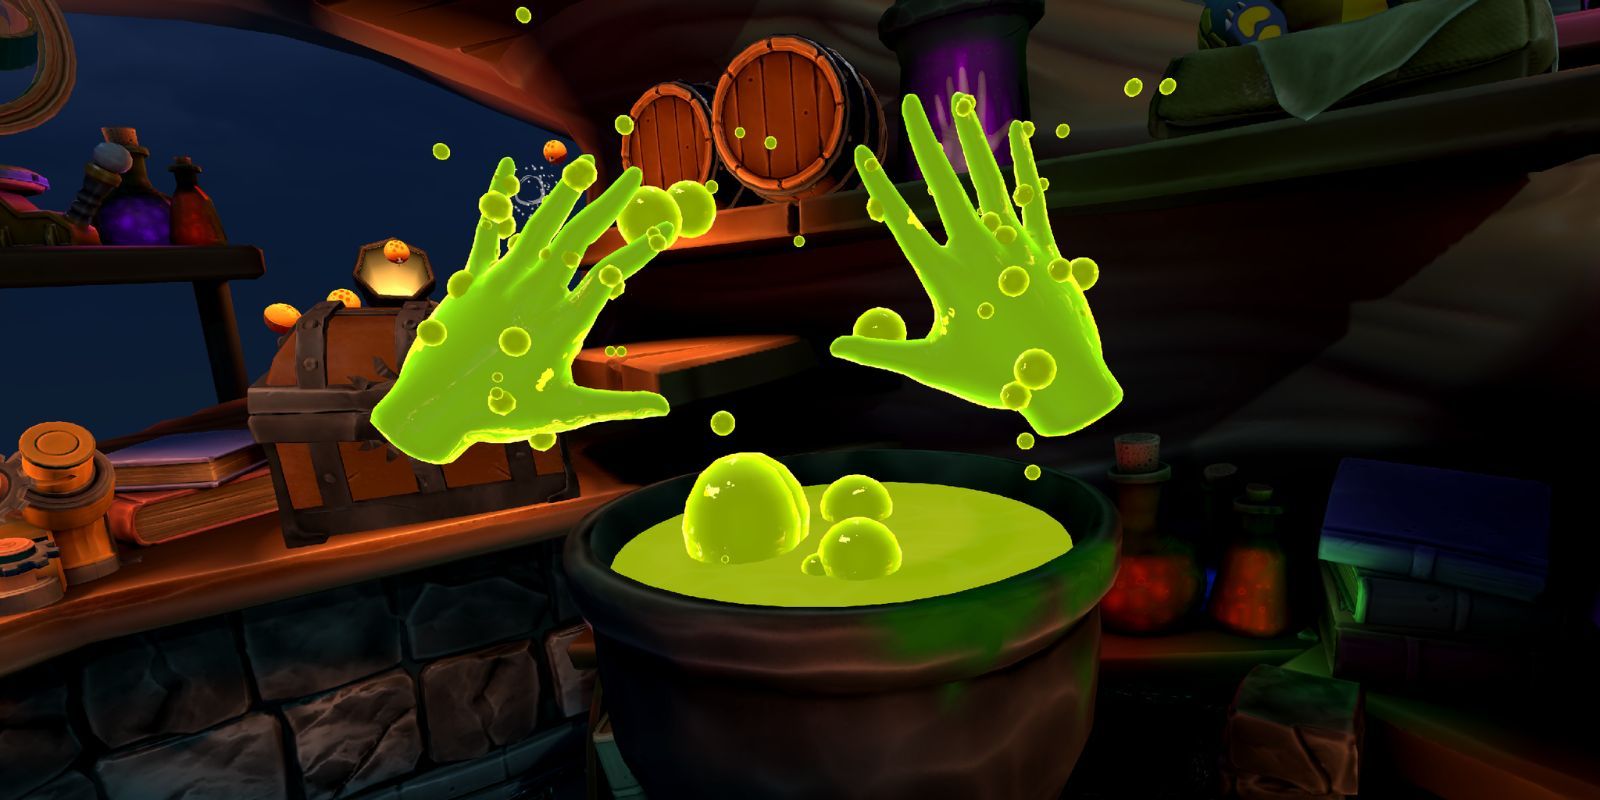 Elixir VR game with a witches cauldron and the players hands are glowing bubbly green